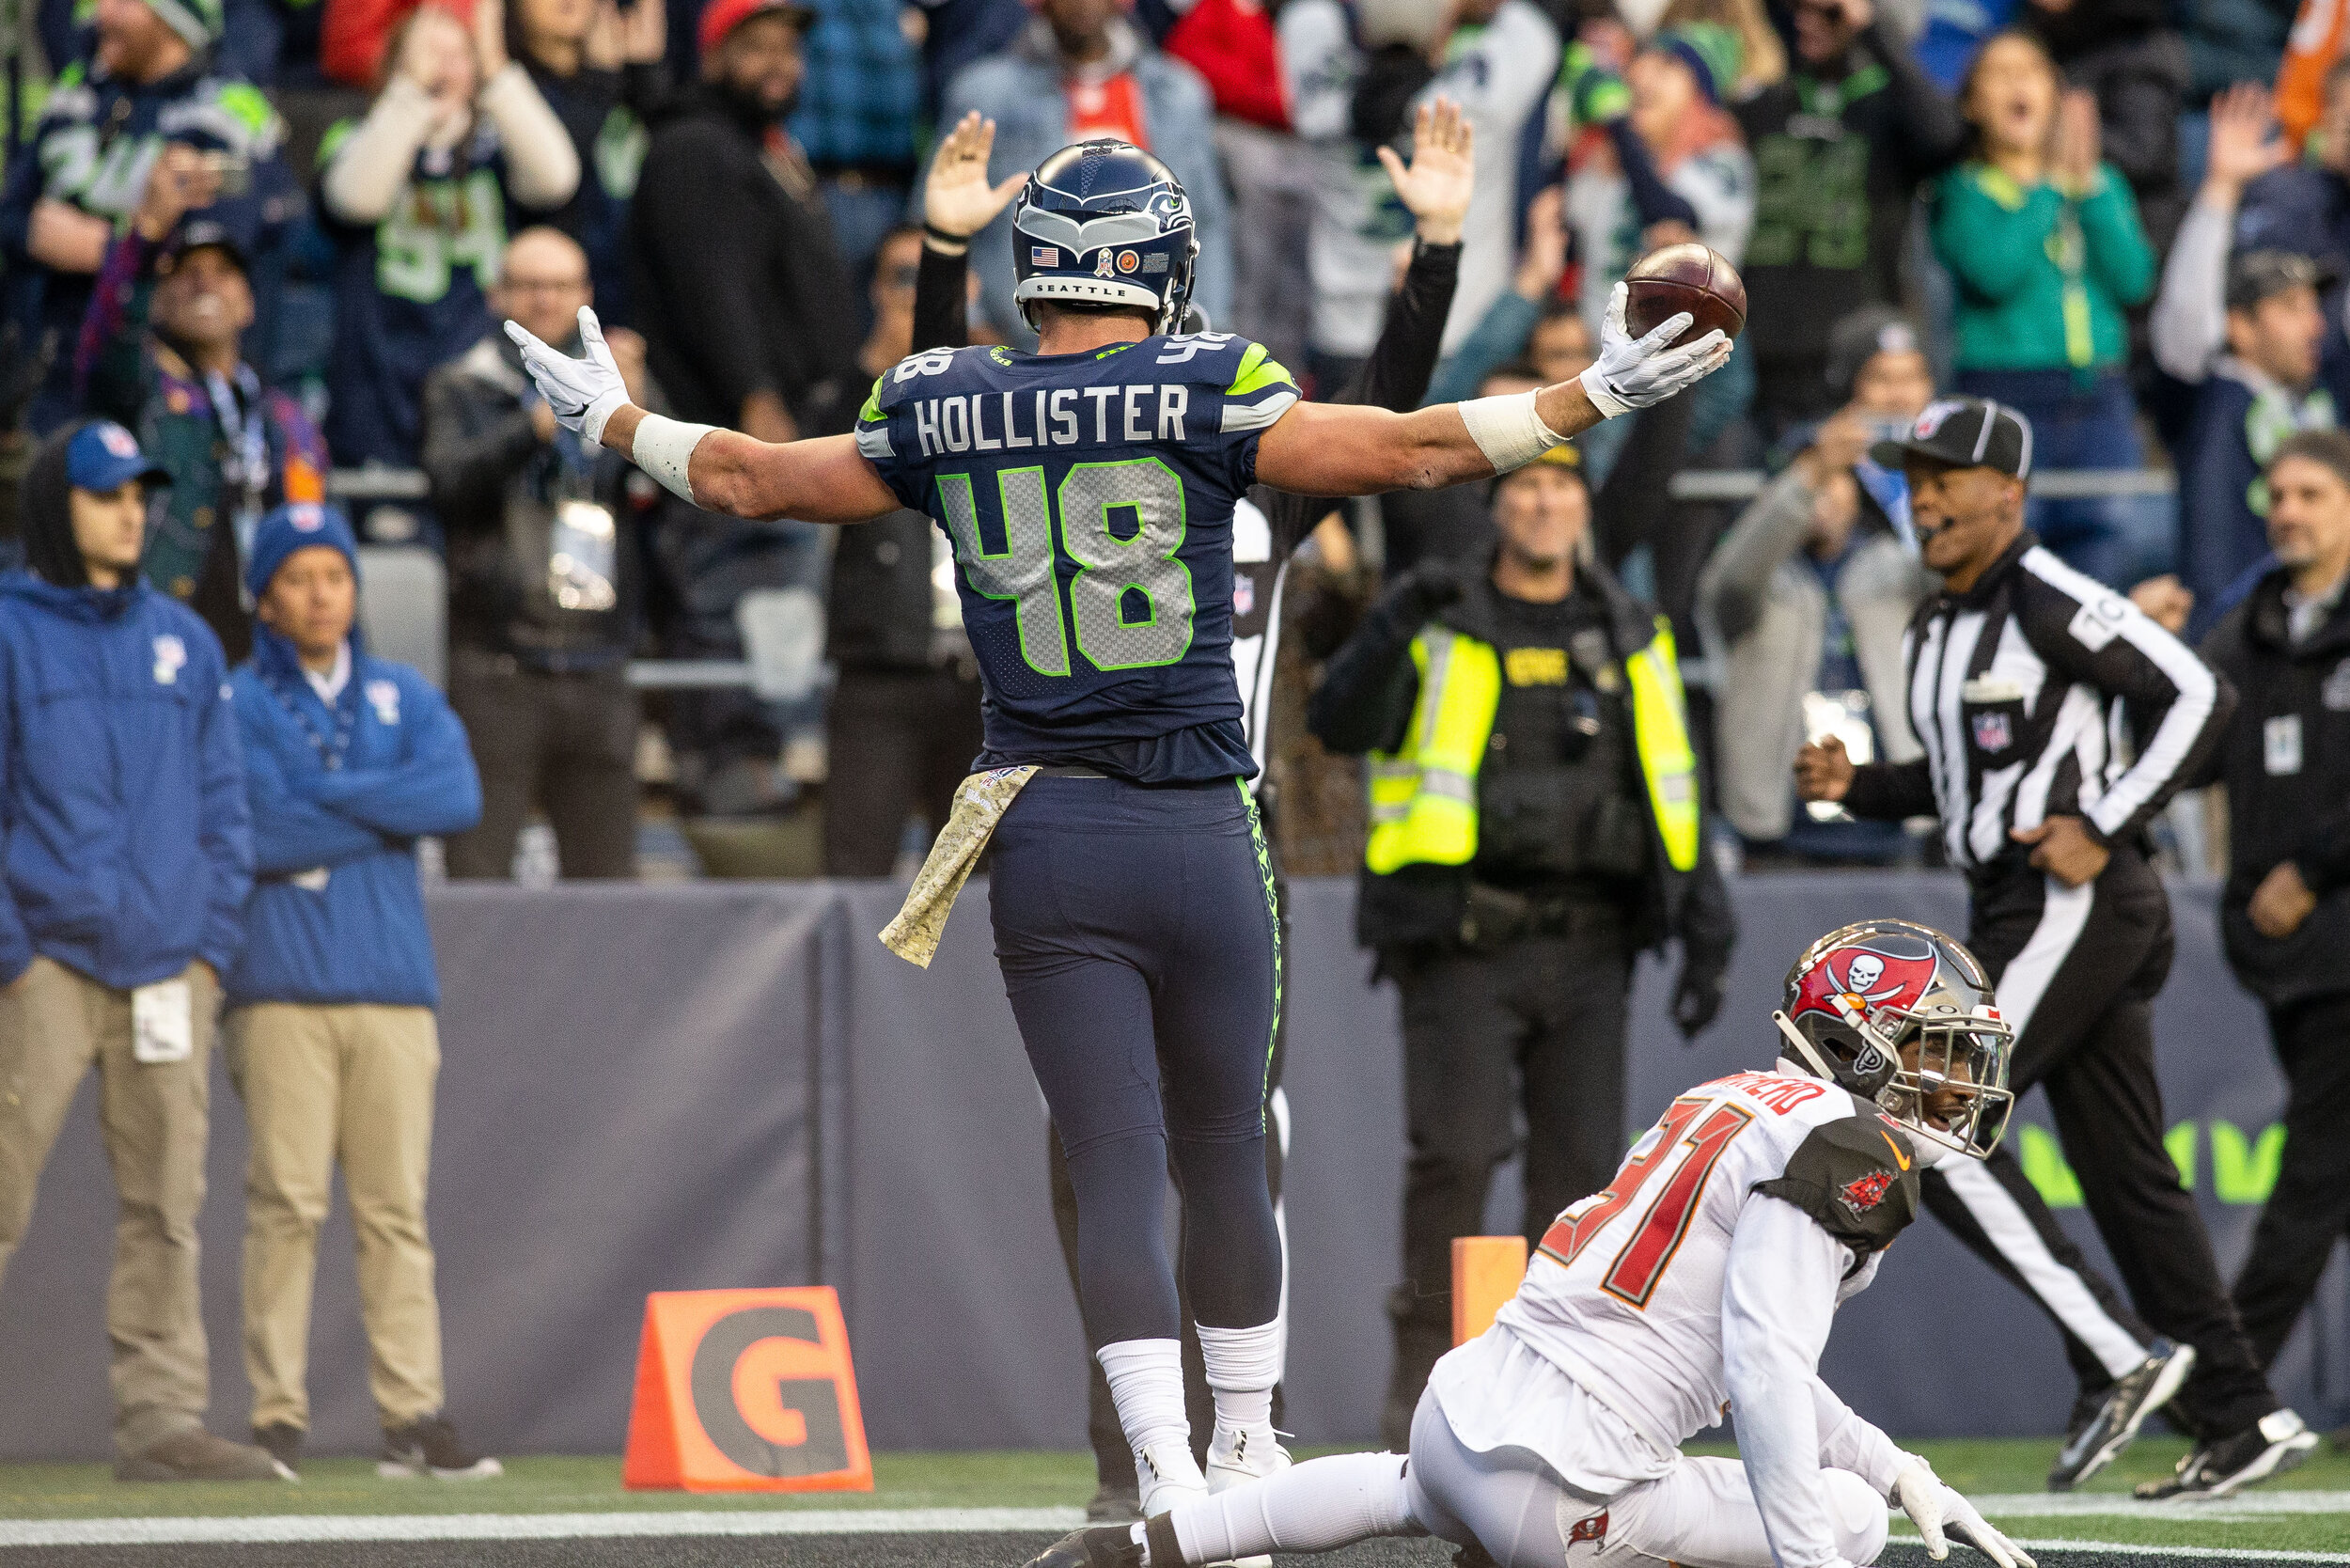  Seattle Seahawks tight end Jacob Hollister (48) reacts to scoring the game winning touchdown reception from quarterback Russell Wilson (3) in overtime of an NFL football game, Sunday, Nov. 3, 2019, in Seattle. Seattle defeated Tampa Bay 40-34 in ove